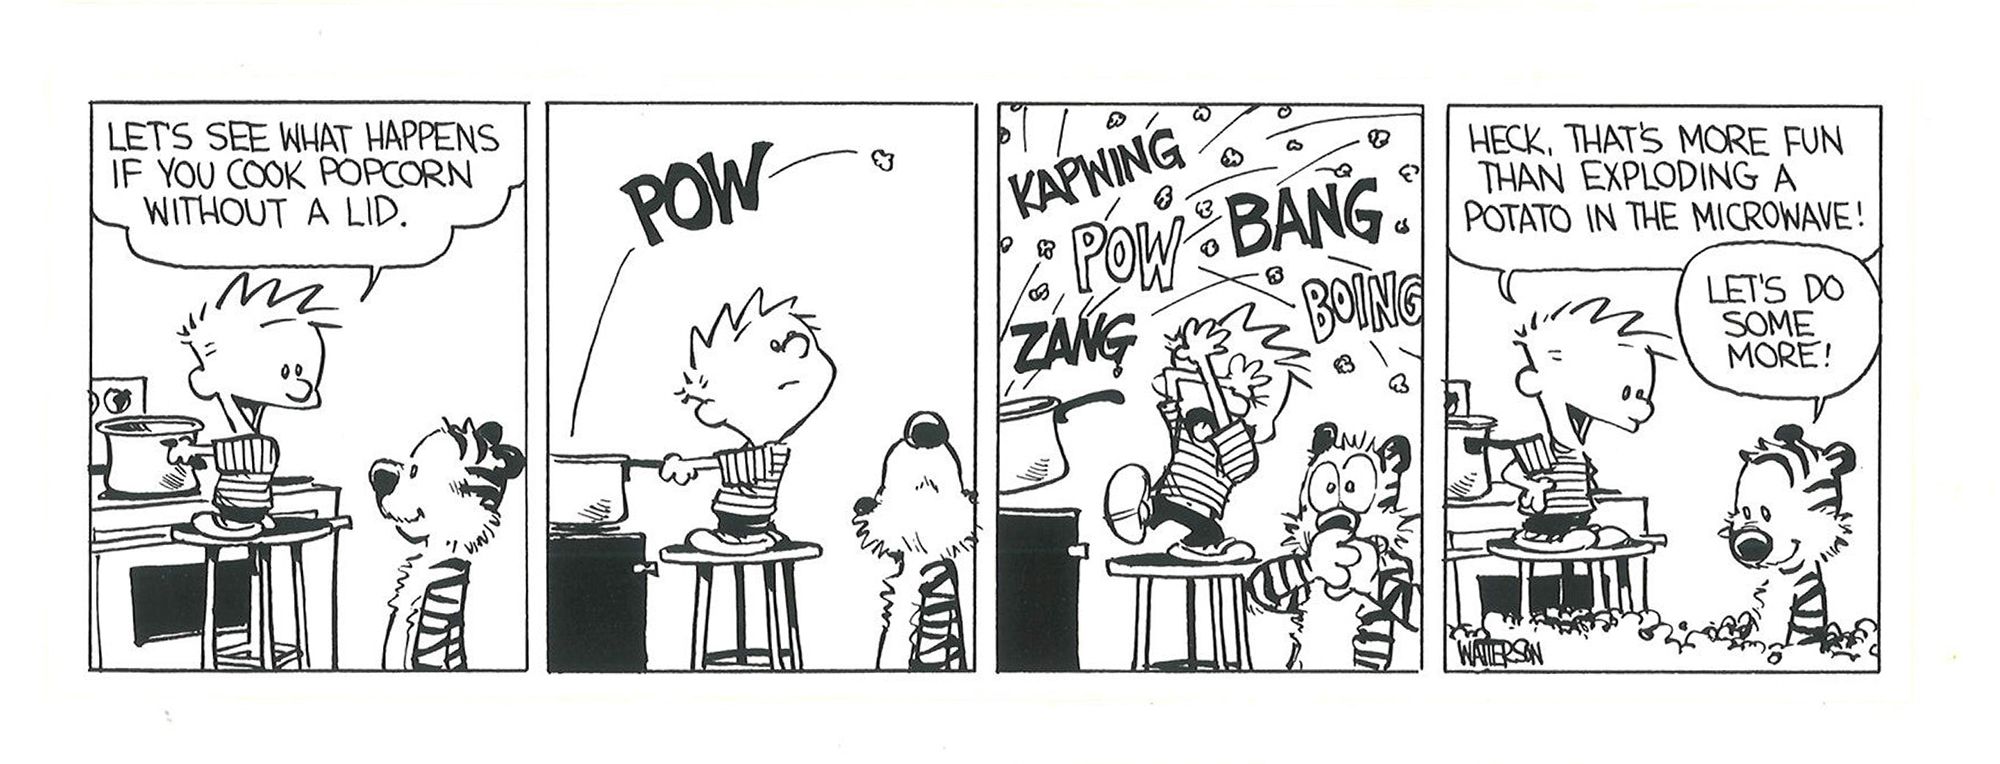 Calvin and Hobbes make popcorn on the stove, without a lid on the pot. Kernels start popping everywhere.